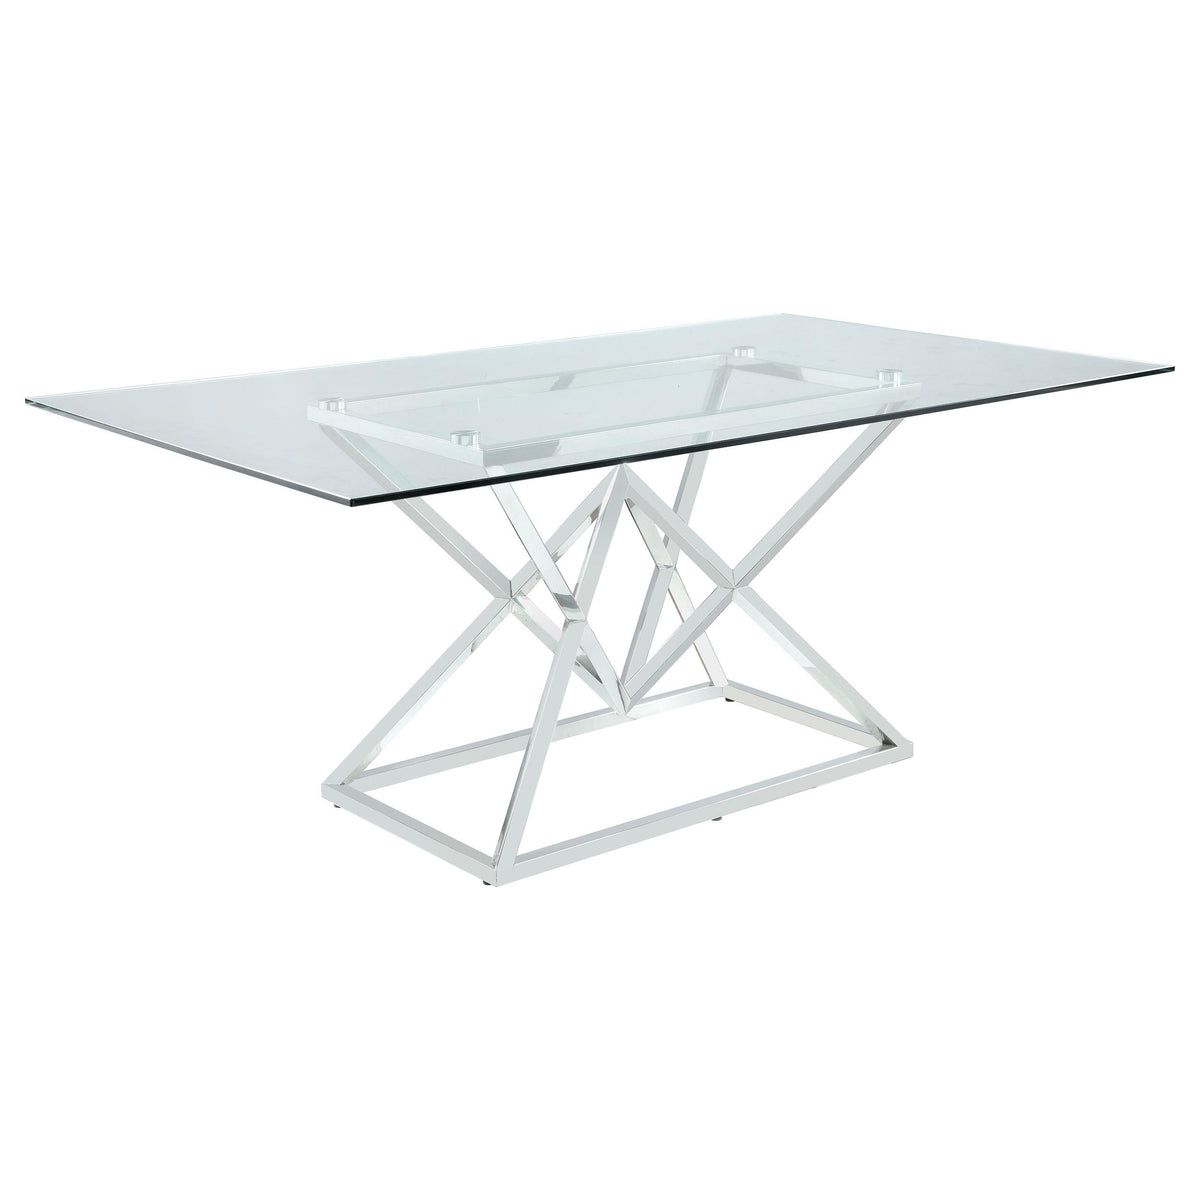 Beaufort Rectangle Glass Top Dining Table Chrome Beaufort Rectangle Glass Top Dining Table Chrome Half Price Furniture